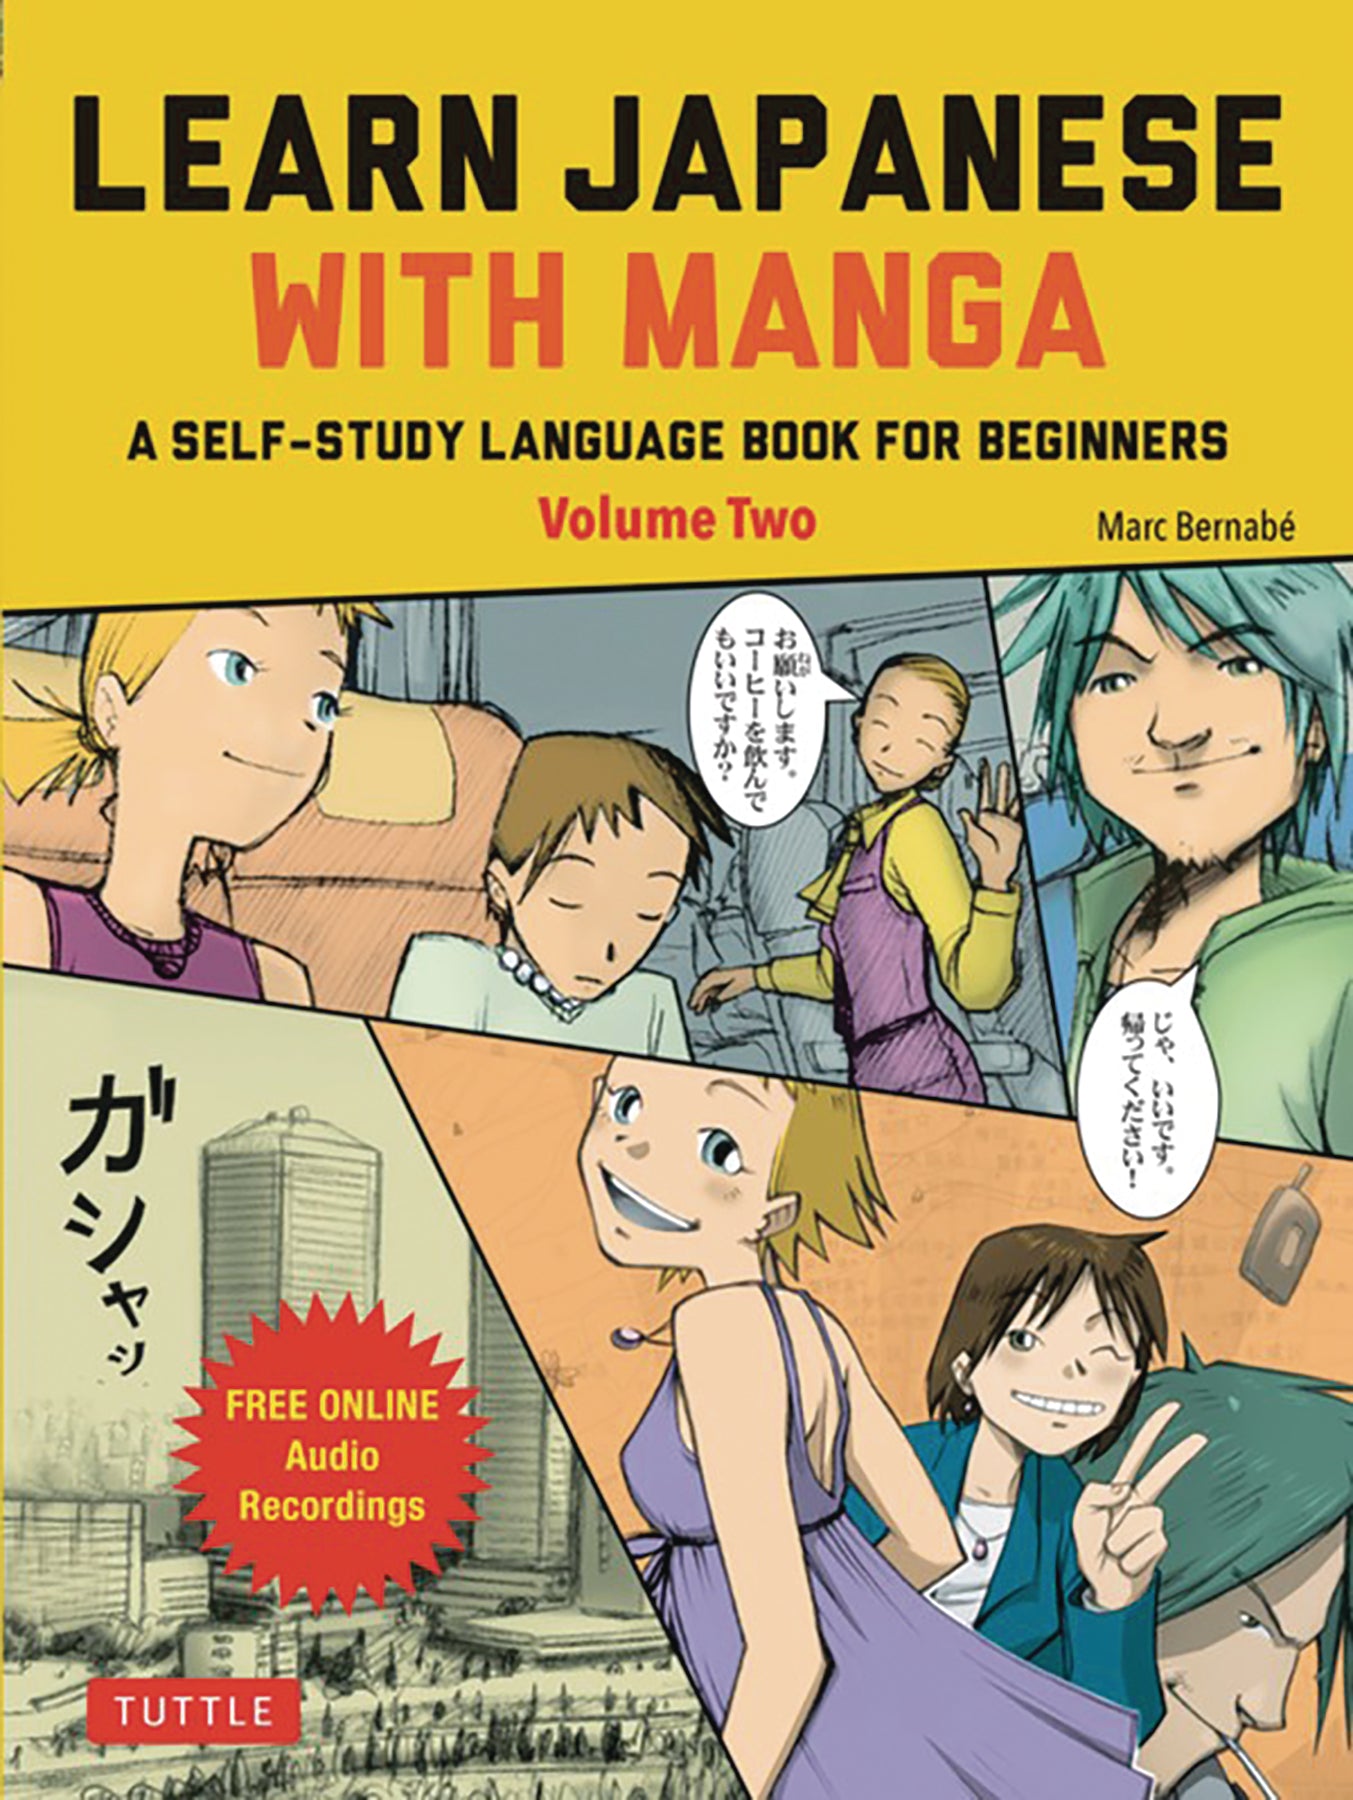 Easy to read manga for Japanese beginners Vol. 01